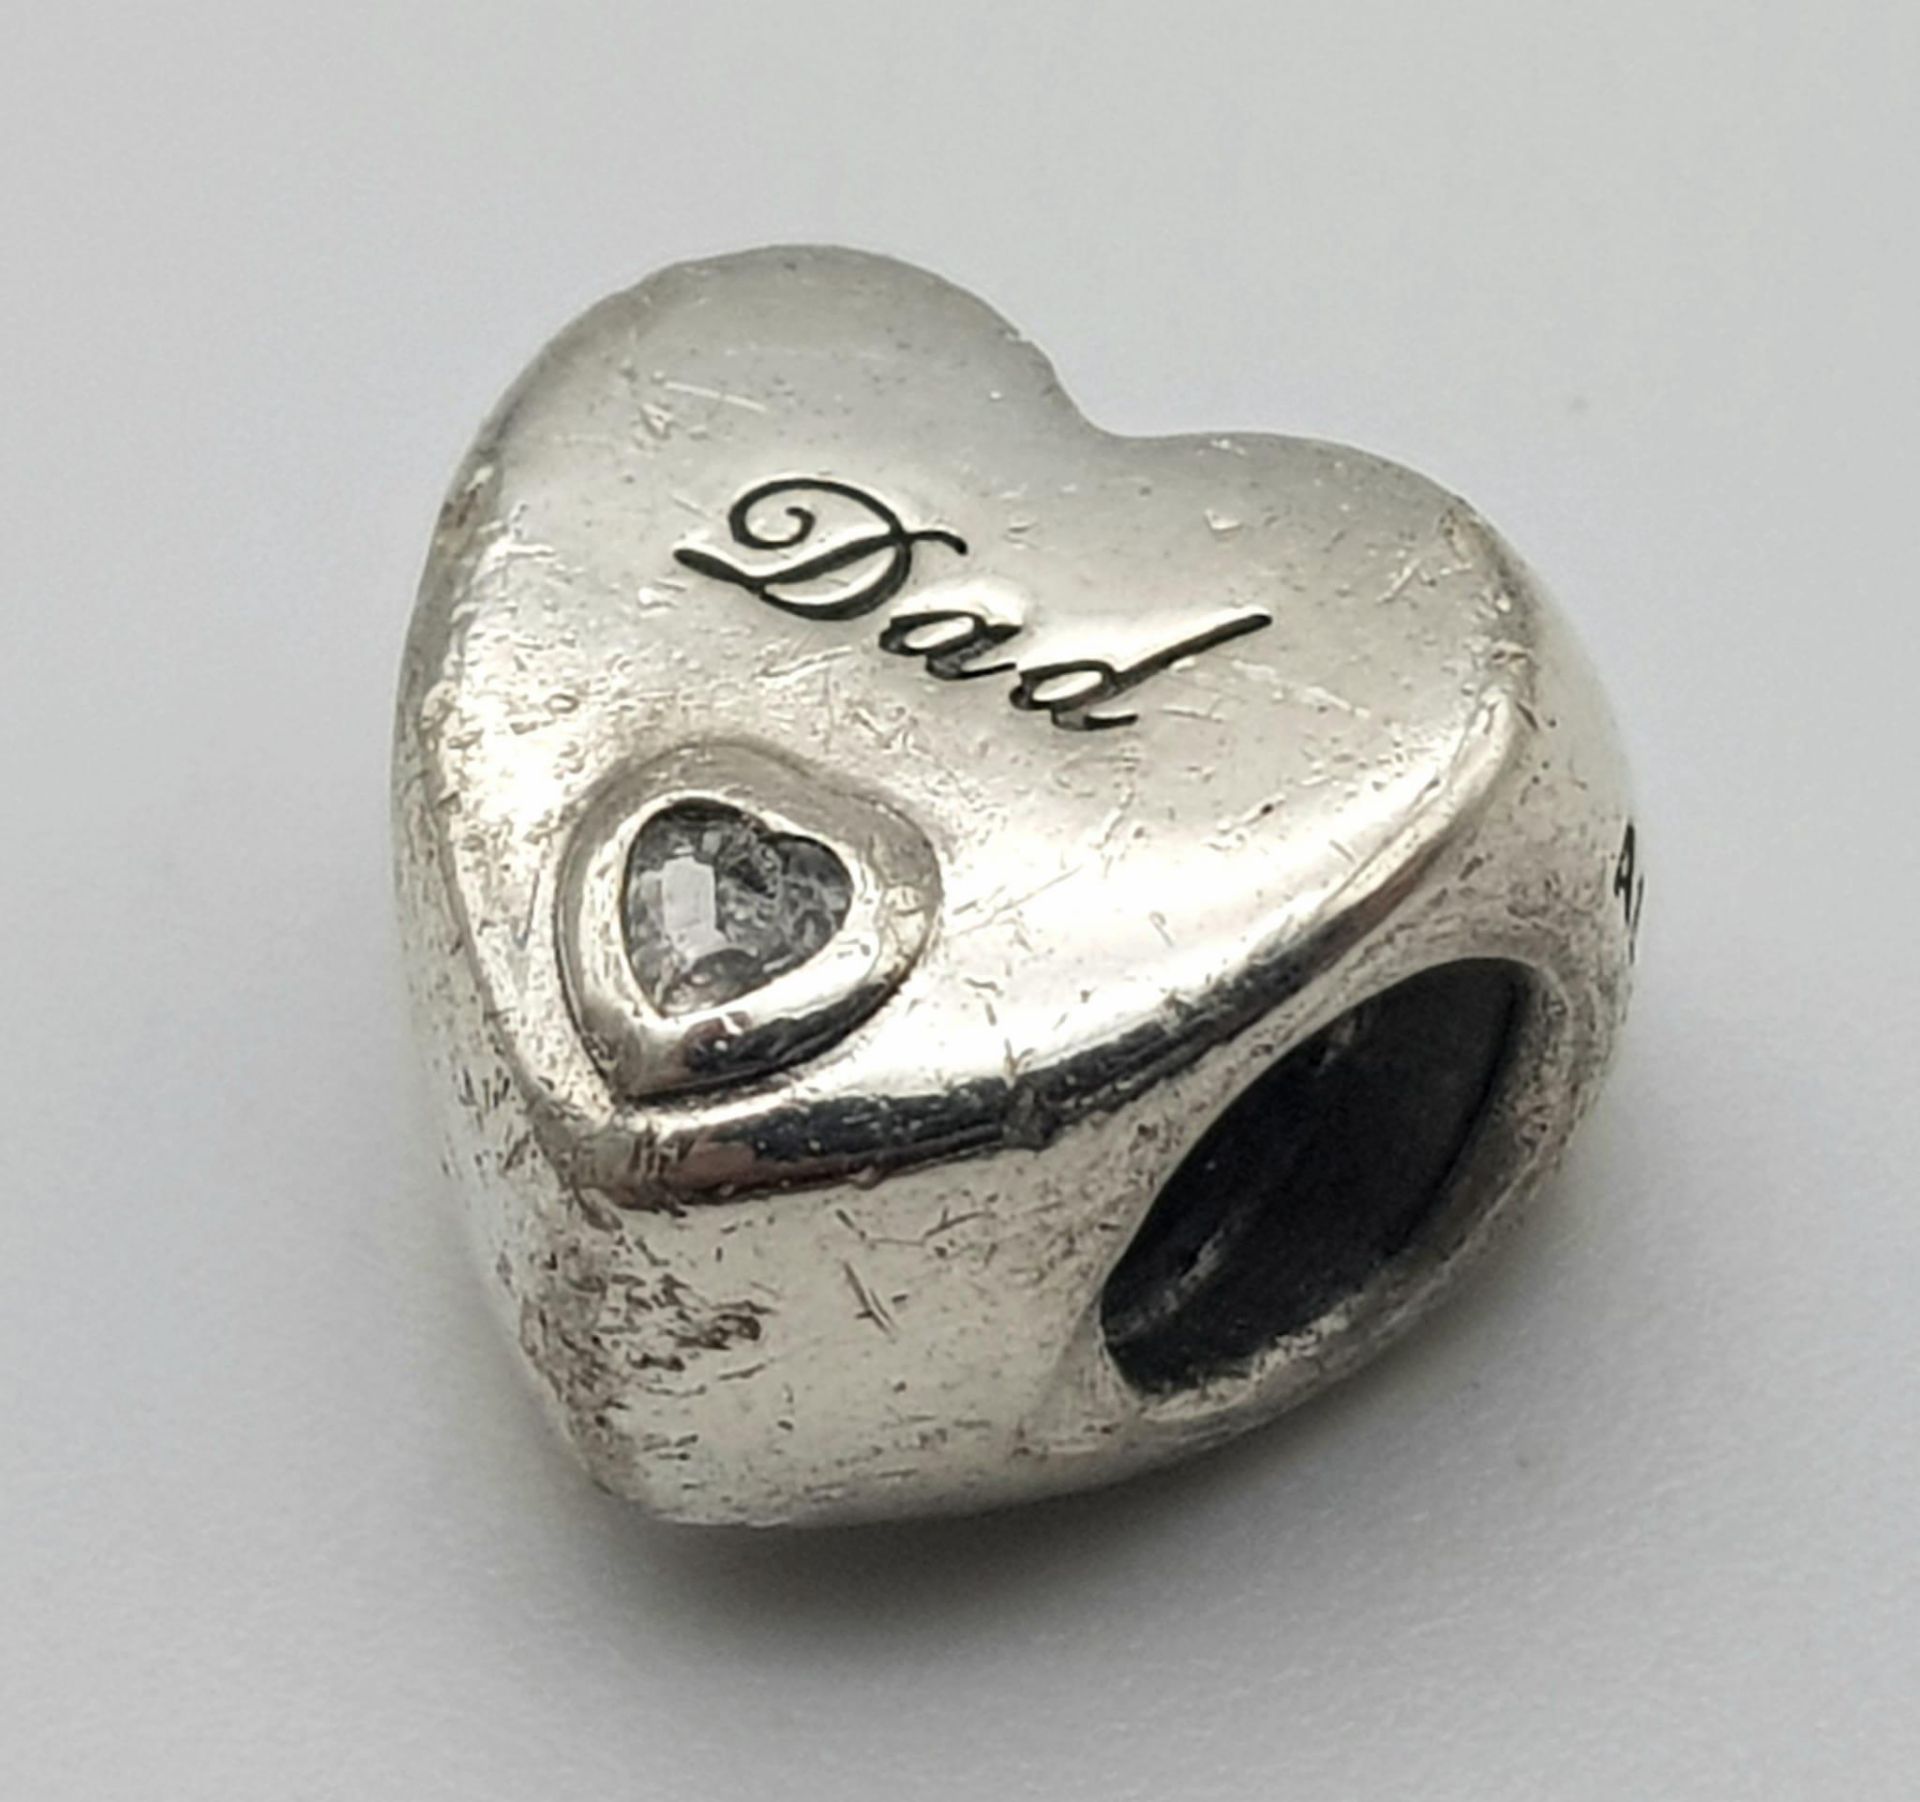 A PANDORA STERLING SILVER HEART SHAPED STONE SET CHARM, ENGRAVED WITH THE WORD "DAD" 3.9G ref: SC - Image 5 of 7